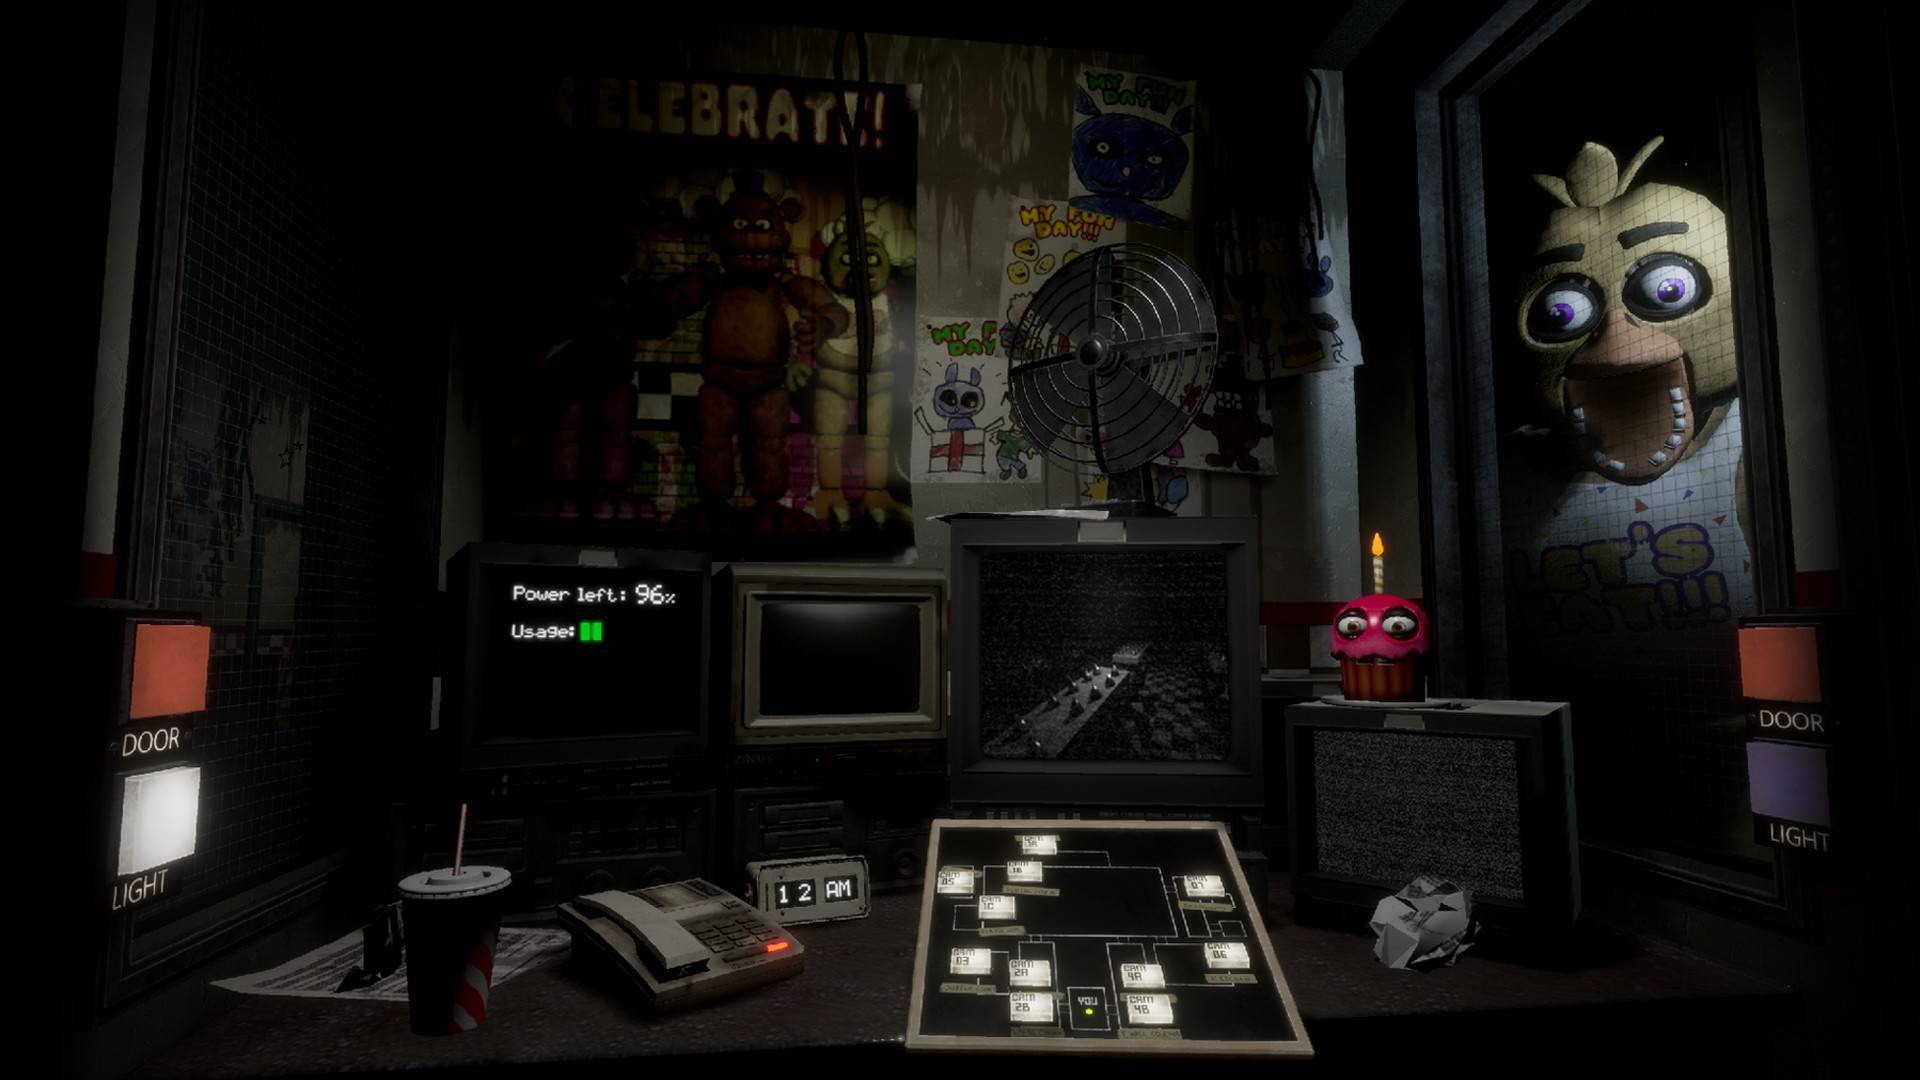 5 nights at freddy's ps4 game